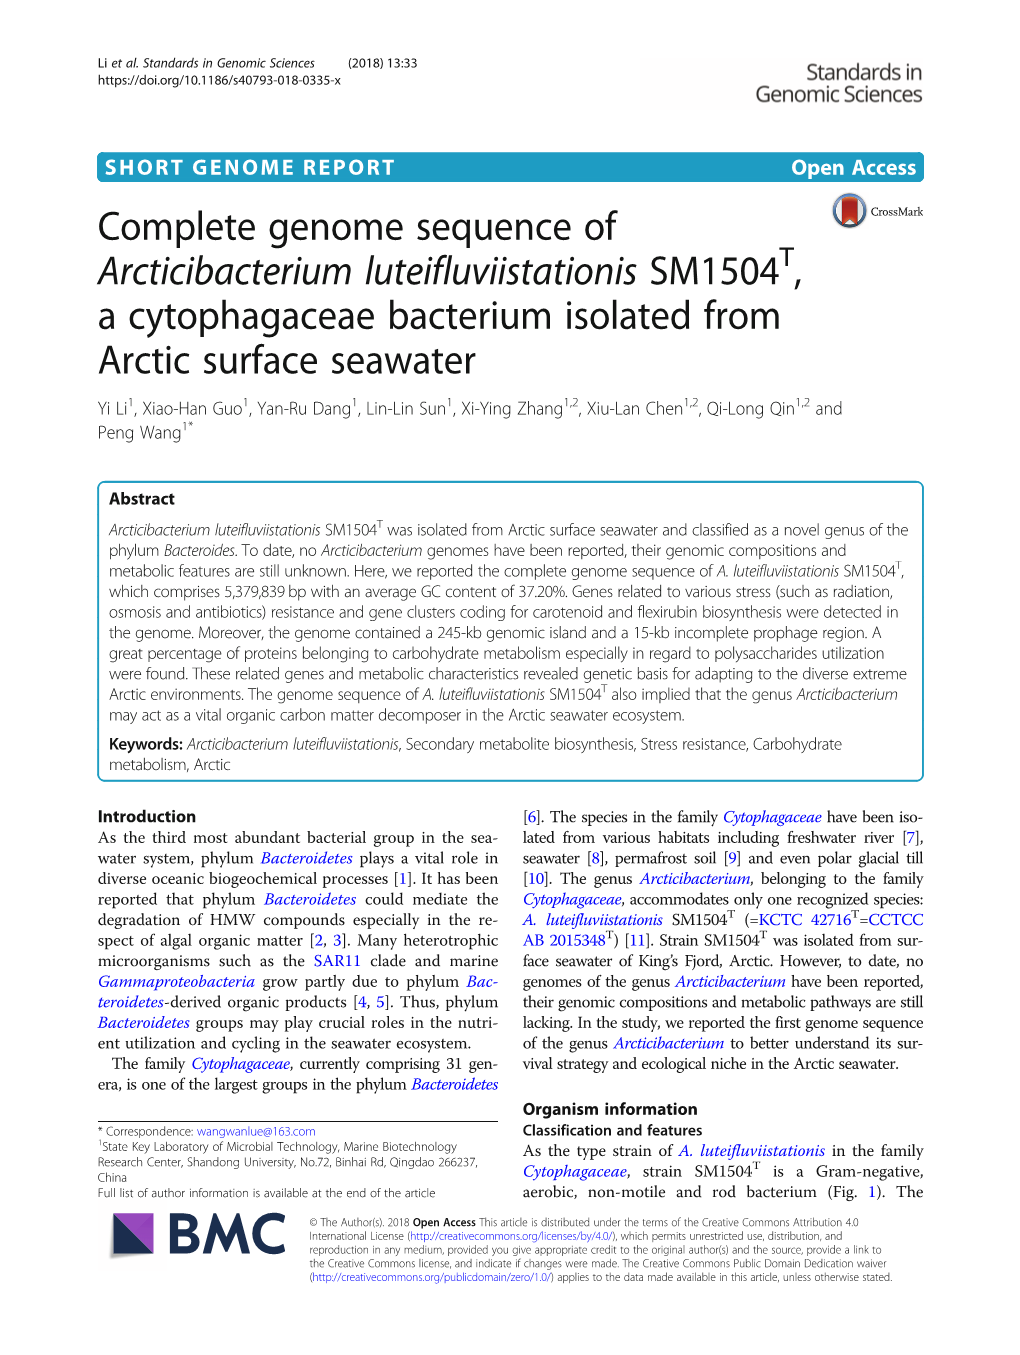 Complete Genome Sequence of Arcticibacterium Luteifluviistationis SM1504T, a Cytophagaceae Bacterium Isolated from Arctic Surfac